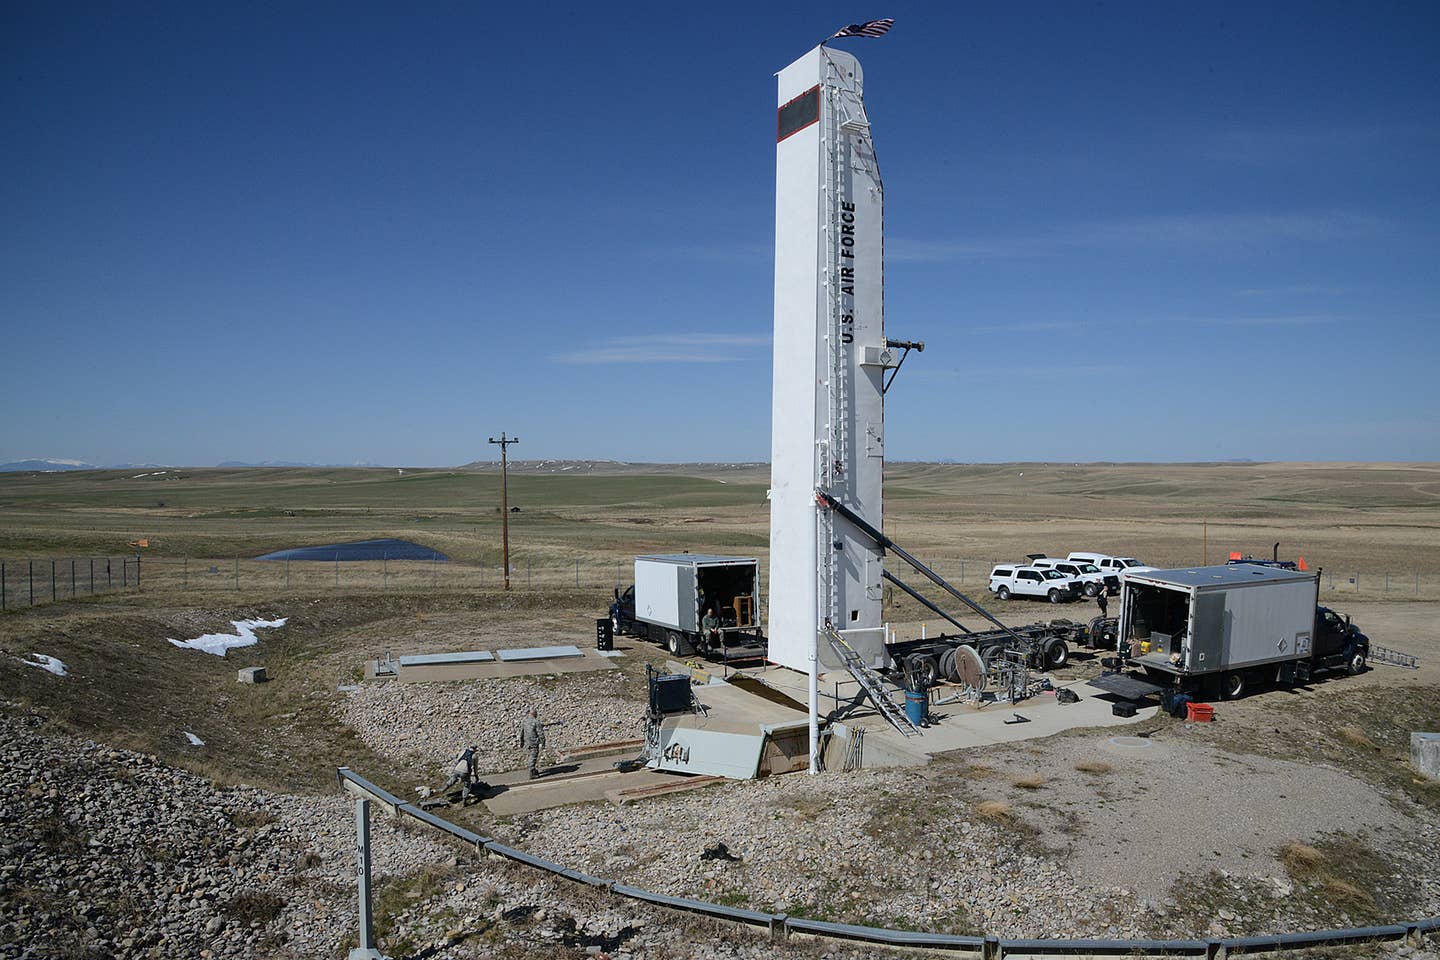 A launch facility operated by Malmstrom Air Force Base in 2017. The 583rd Missile Maintenance Squadron, part of Air Force Materiel Command, completed programmed depot maintenance on a launch facility at Malmstrom, a first-ever for the intercontinental ballistic missile weapons system. <em>U.S. Air Force photo/Staff Sgt. Delia Marchick</em>